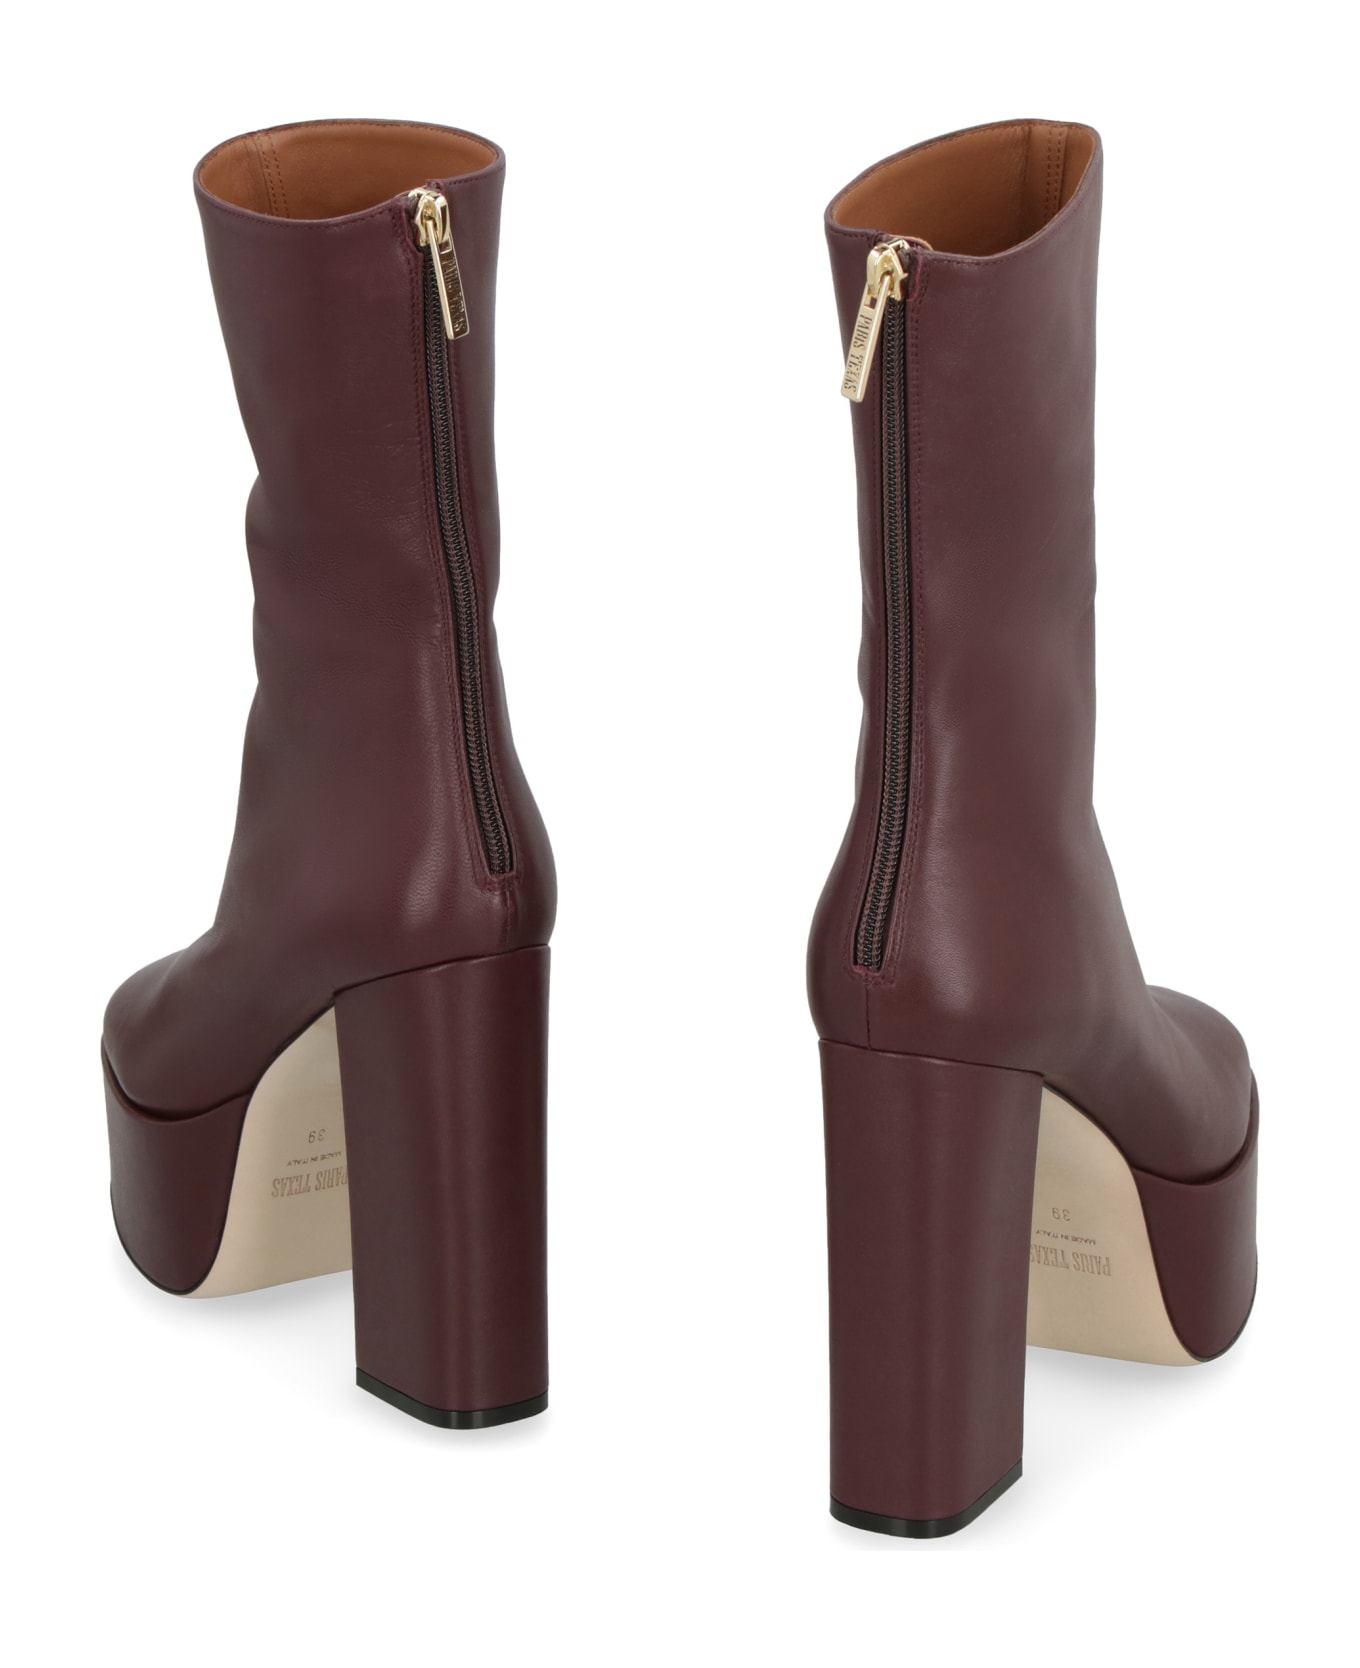 Paris Texas Lexy Leather Ankle Boots - Burgundy